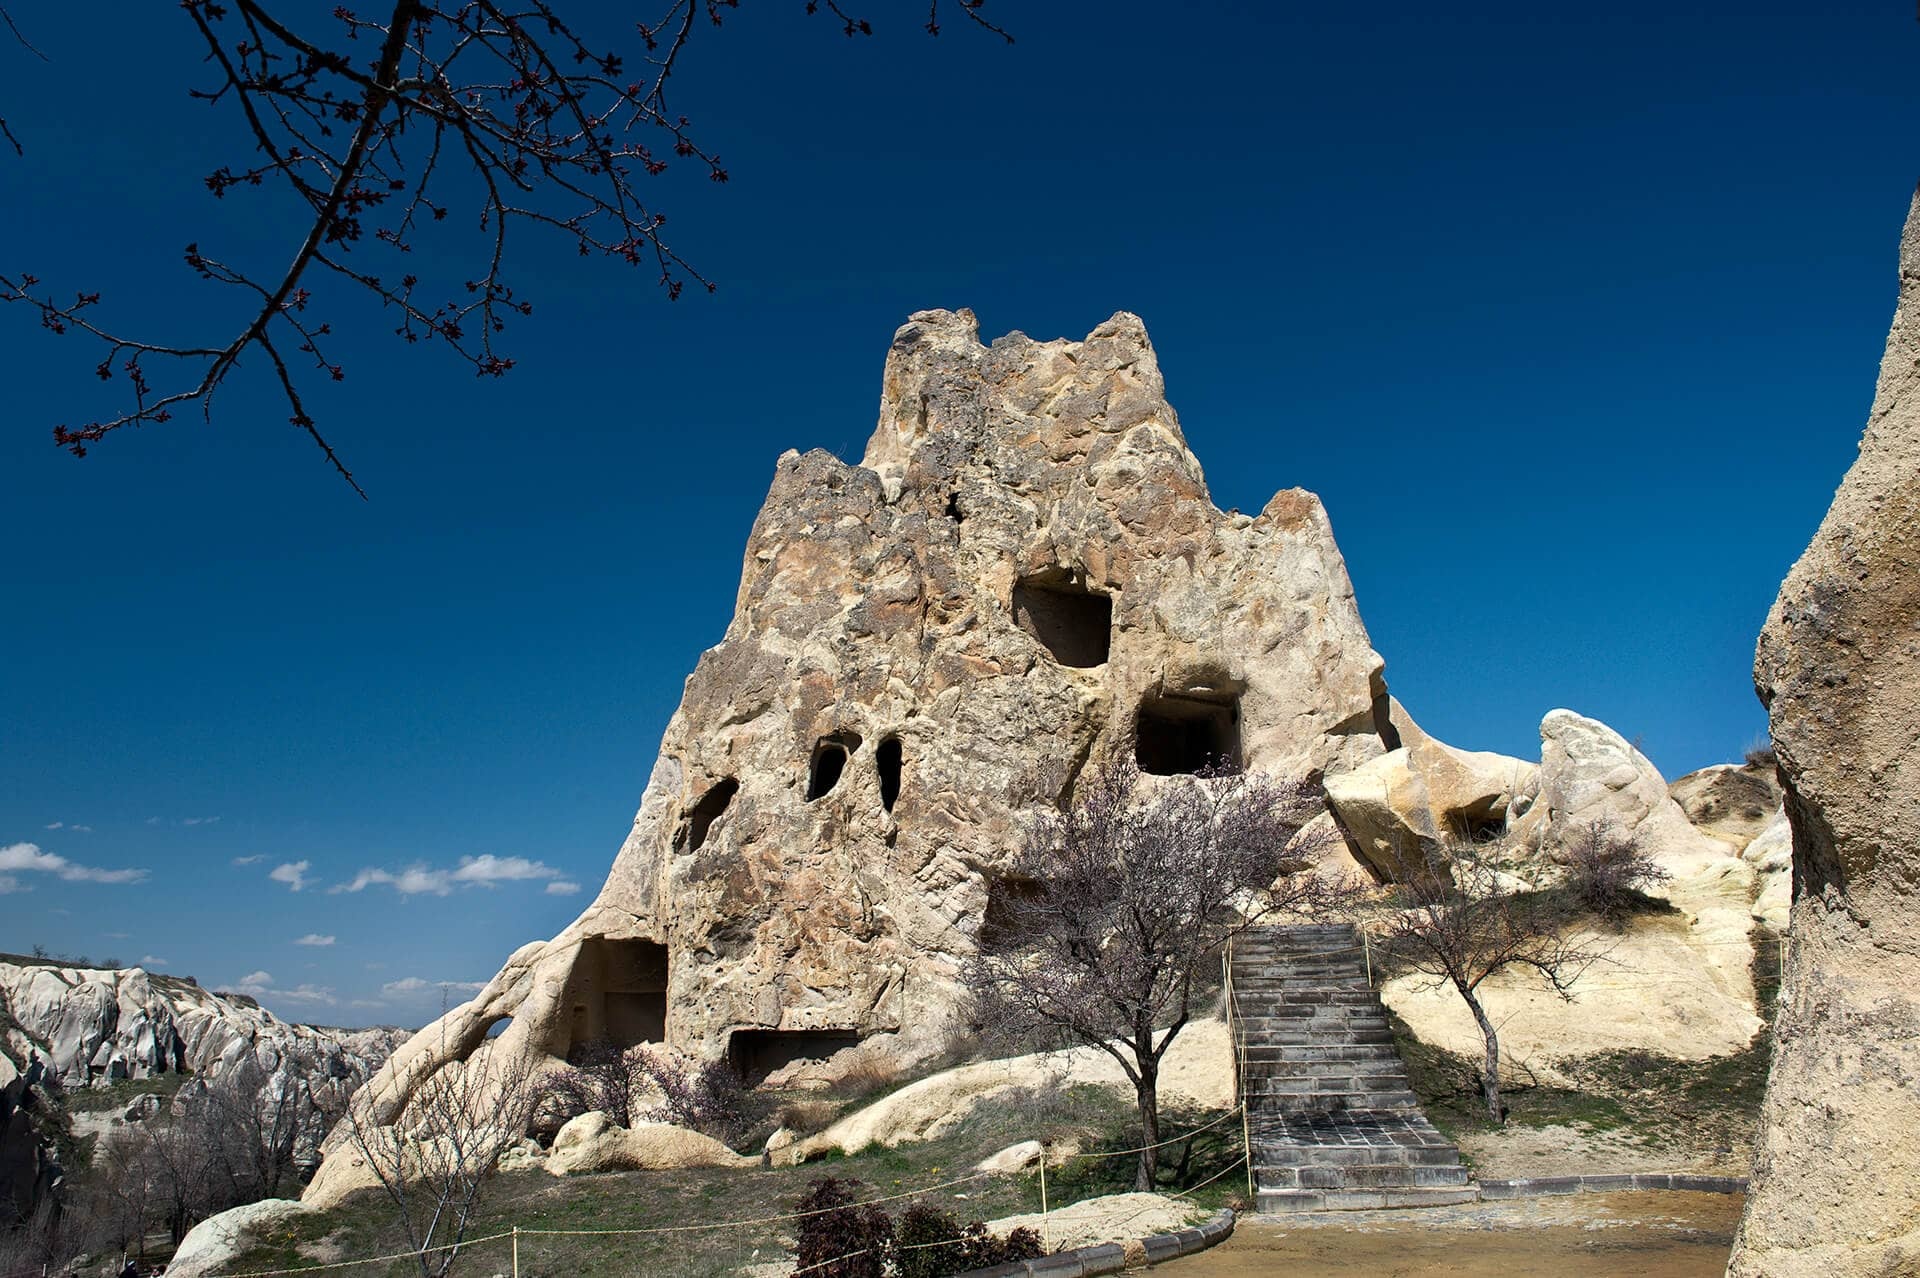 Goreme National Park, Early Christianity history, Unique experiences, Cultural significance, 1920x1280 HD Desktop